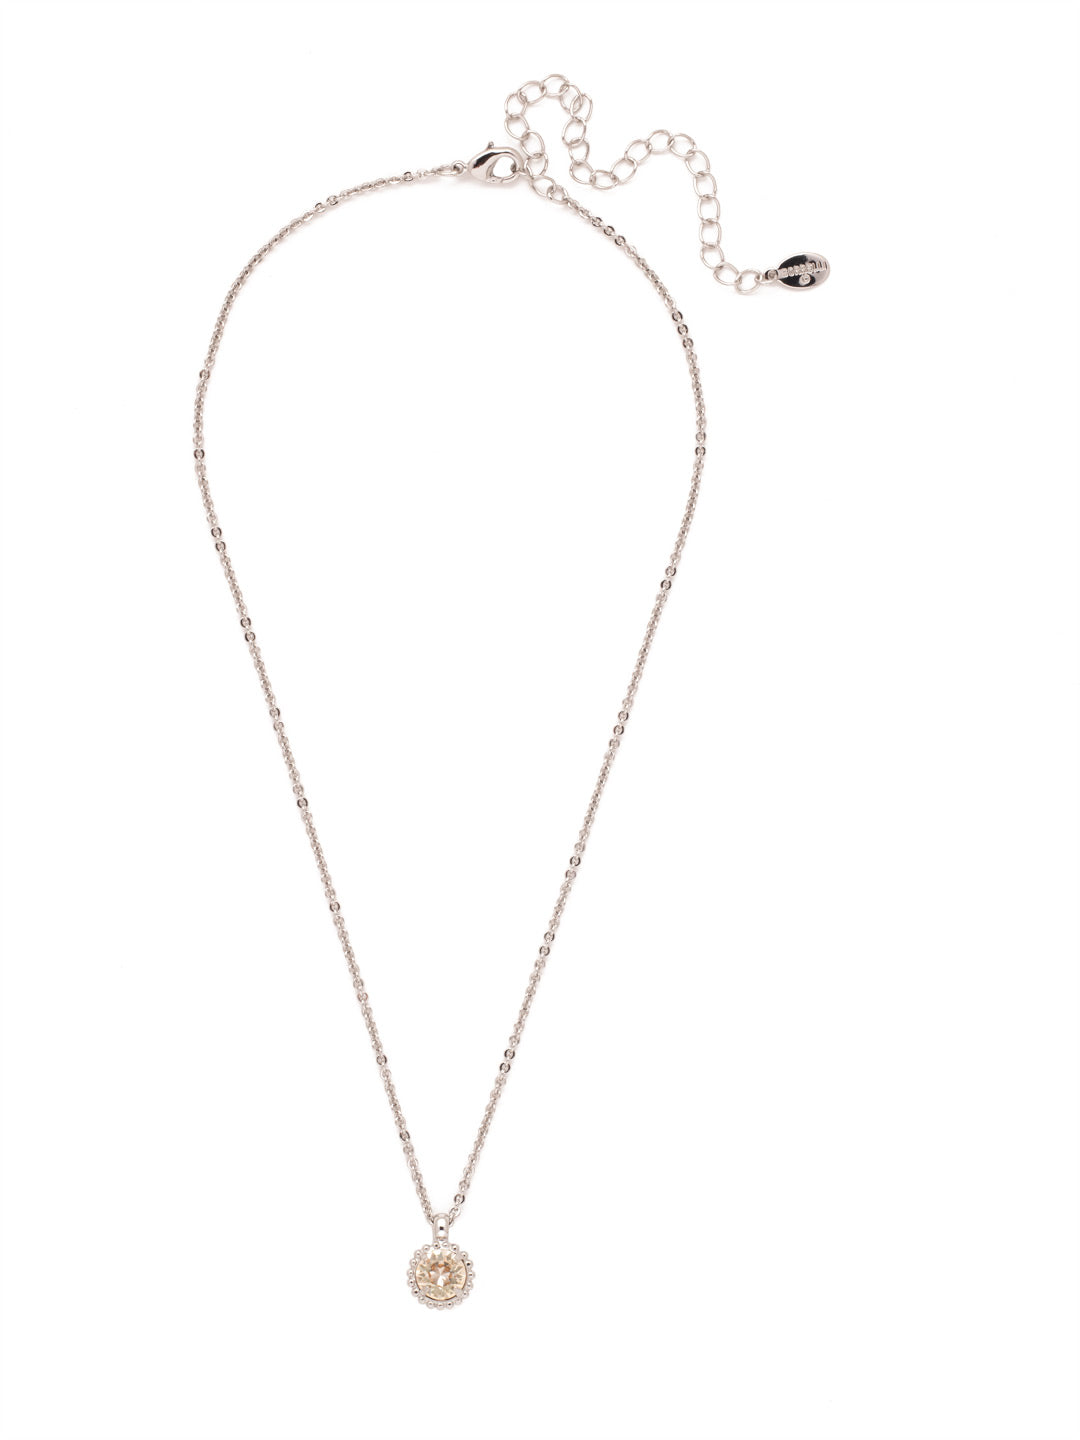 Simplicity Pendant Necklace - NBY38RHCCH - <p>Perfect for any day! The Simplicity Pendant Necklace features a round cut crystal with vintage edging. From Sorrelli's Crystal Champagne collection in our Palladium Silver-tone finish.</p>